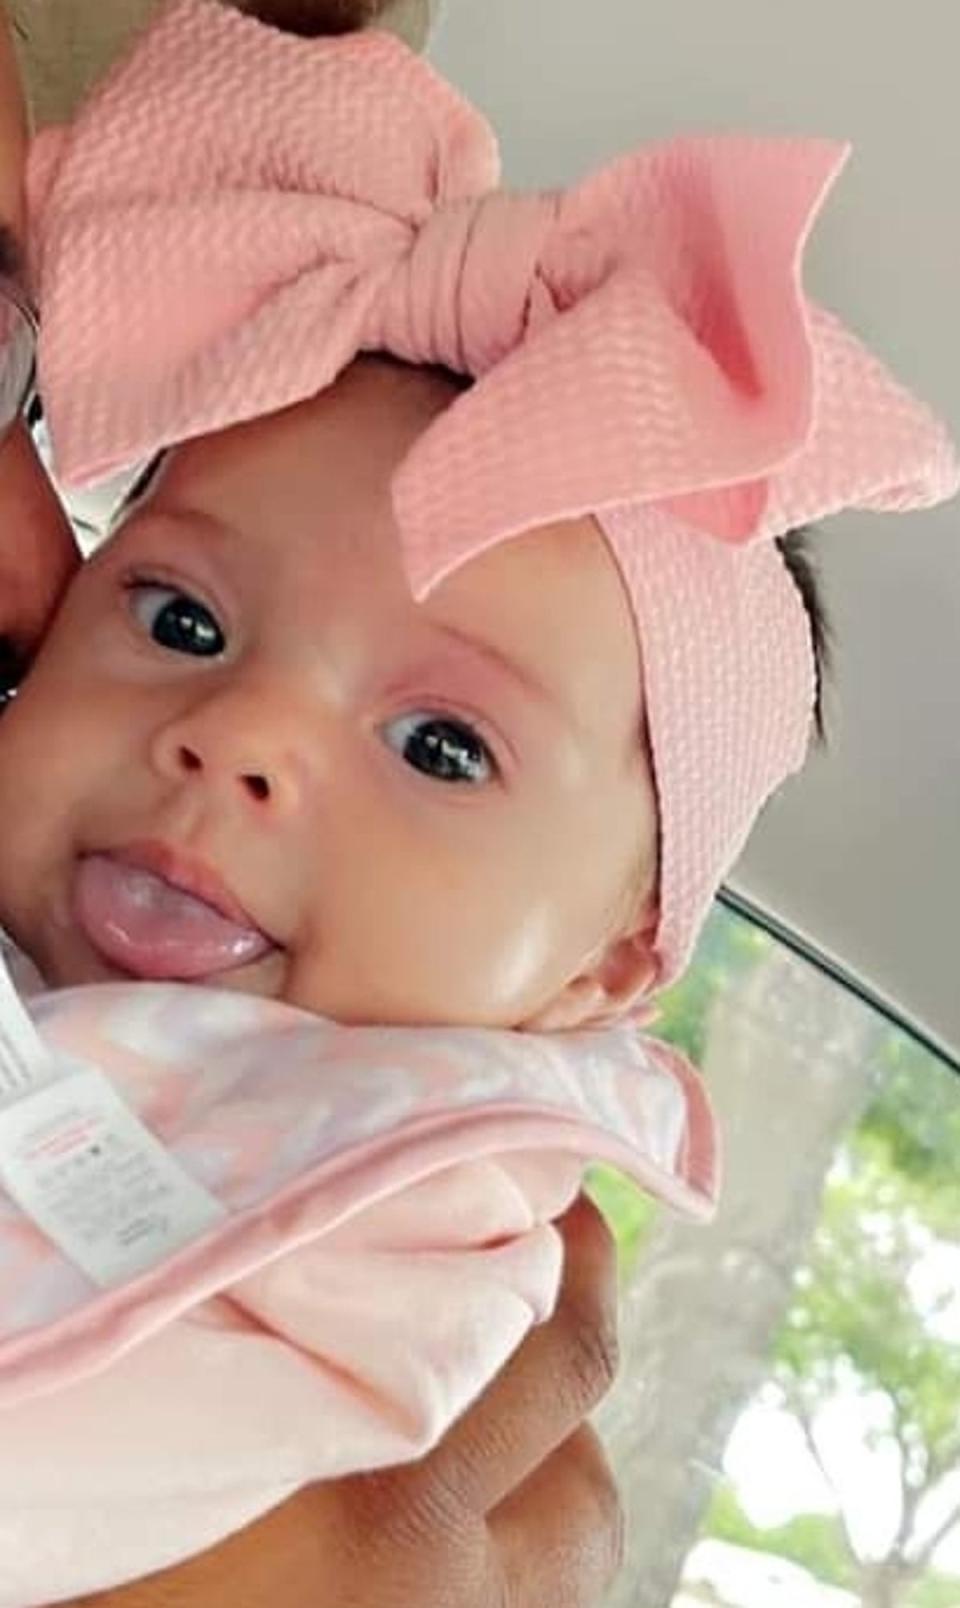 10-month-old Eleia Maria Torres was kidnapped on May 3 in New Mexico (Clovis Police Department)